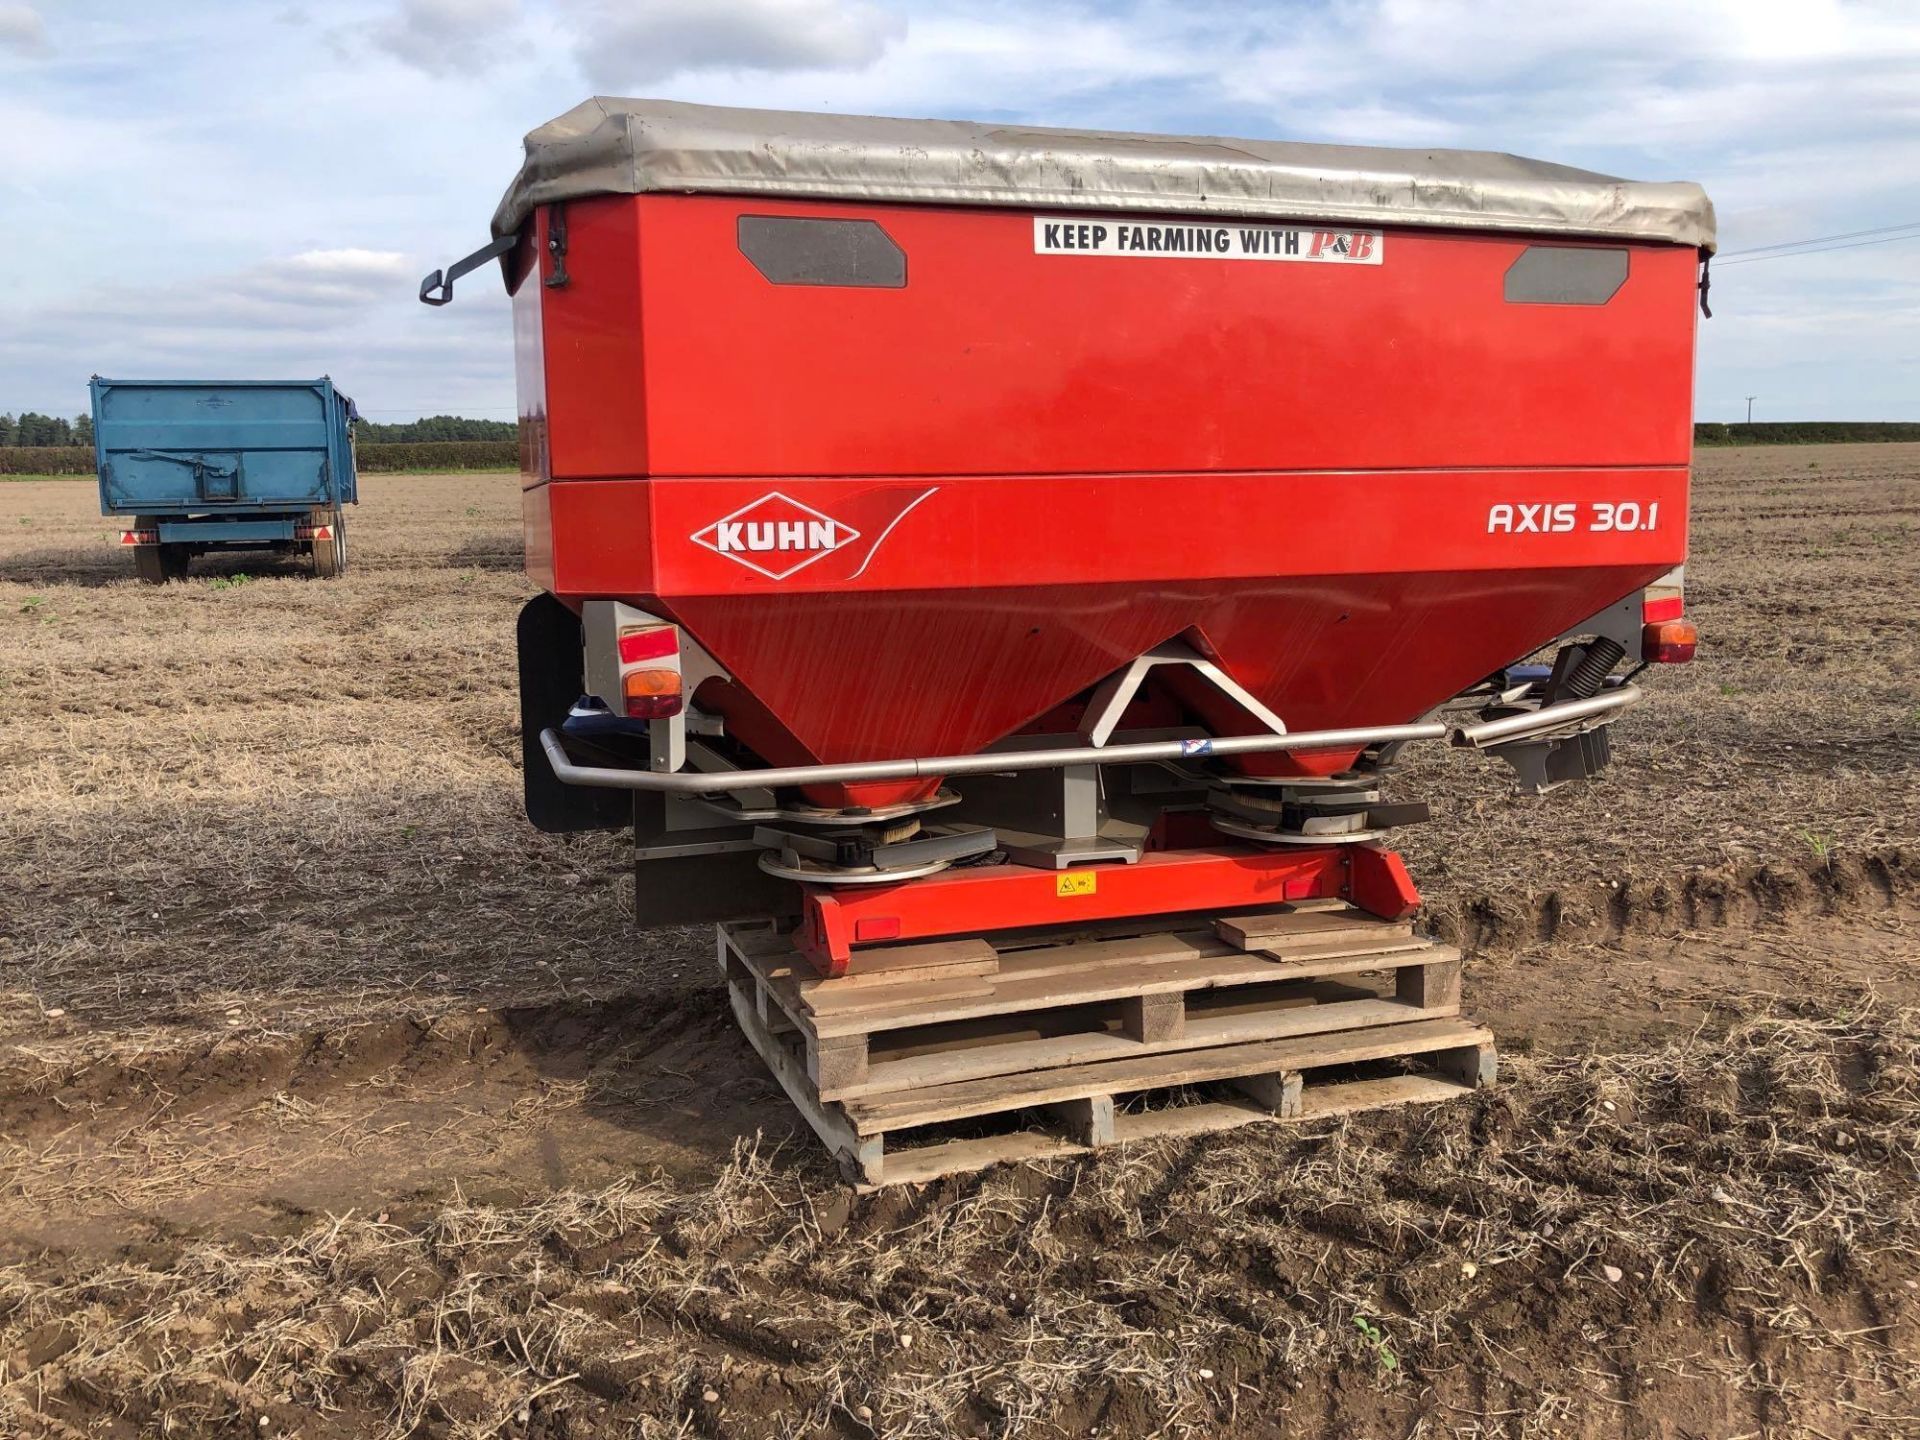 2008 Kuhn Axis 30.1 20m twin disc fertiliser spreader with border control. Serial No: 19289 - Image 2 of 13